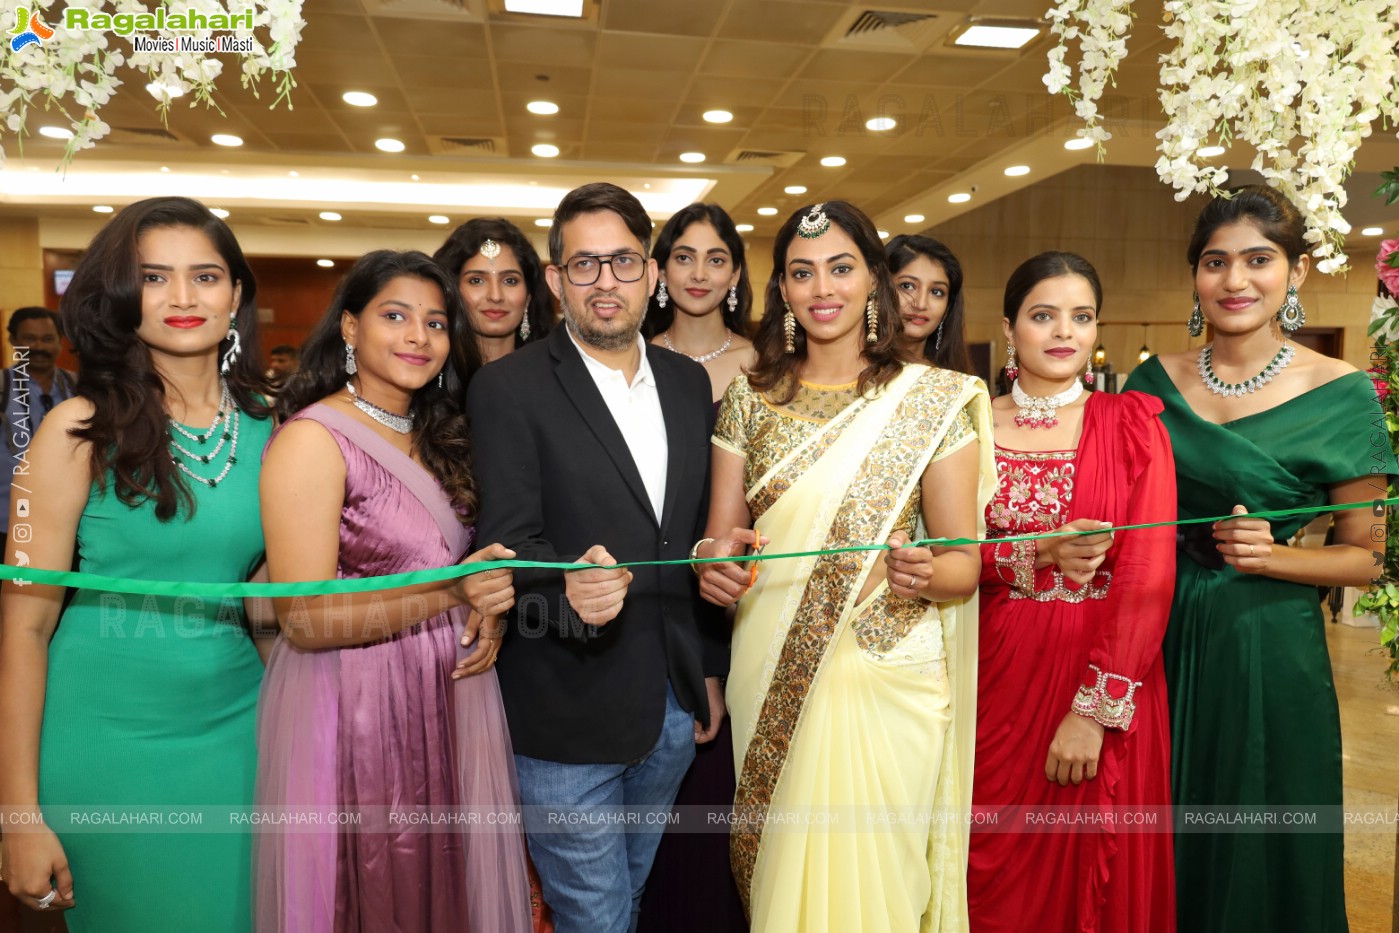 Grand Inauguration of the Sutraa Exhibition at Hotel Novotel (HICC)